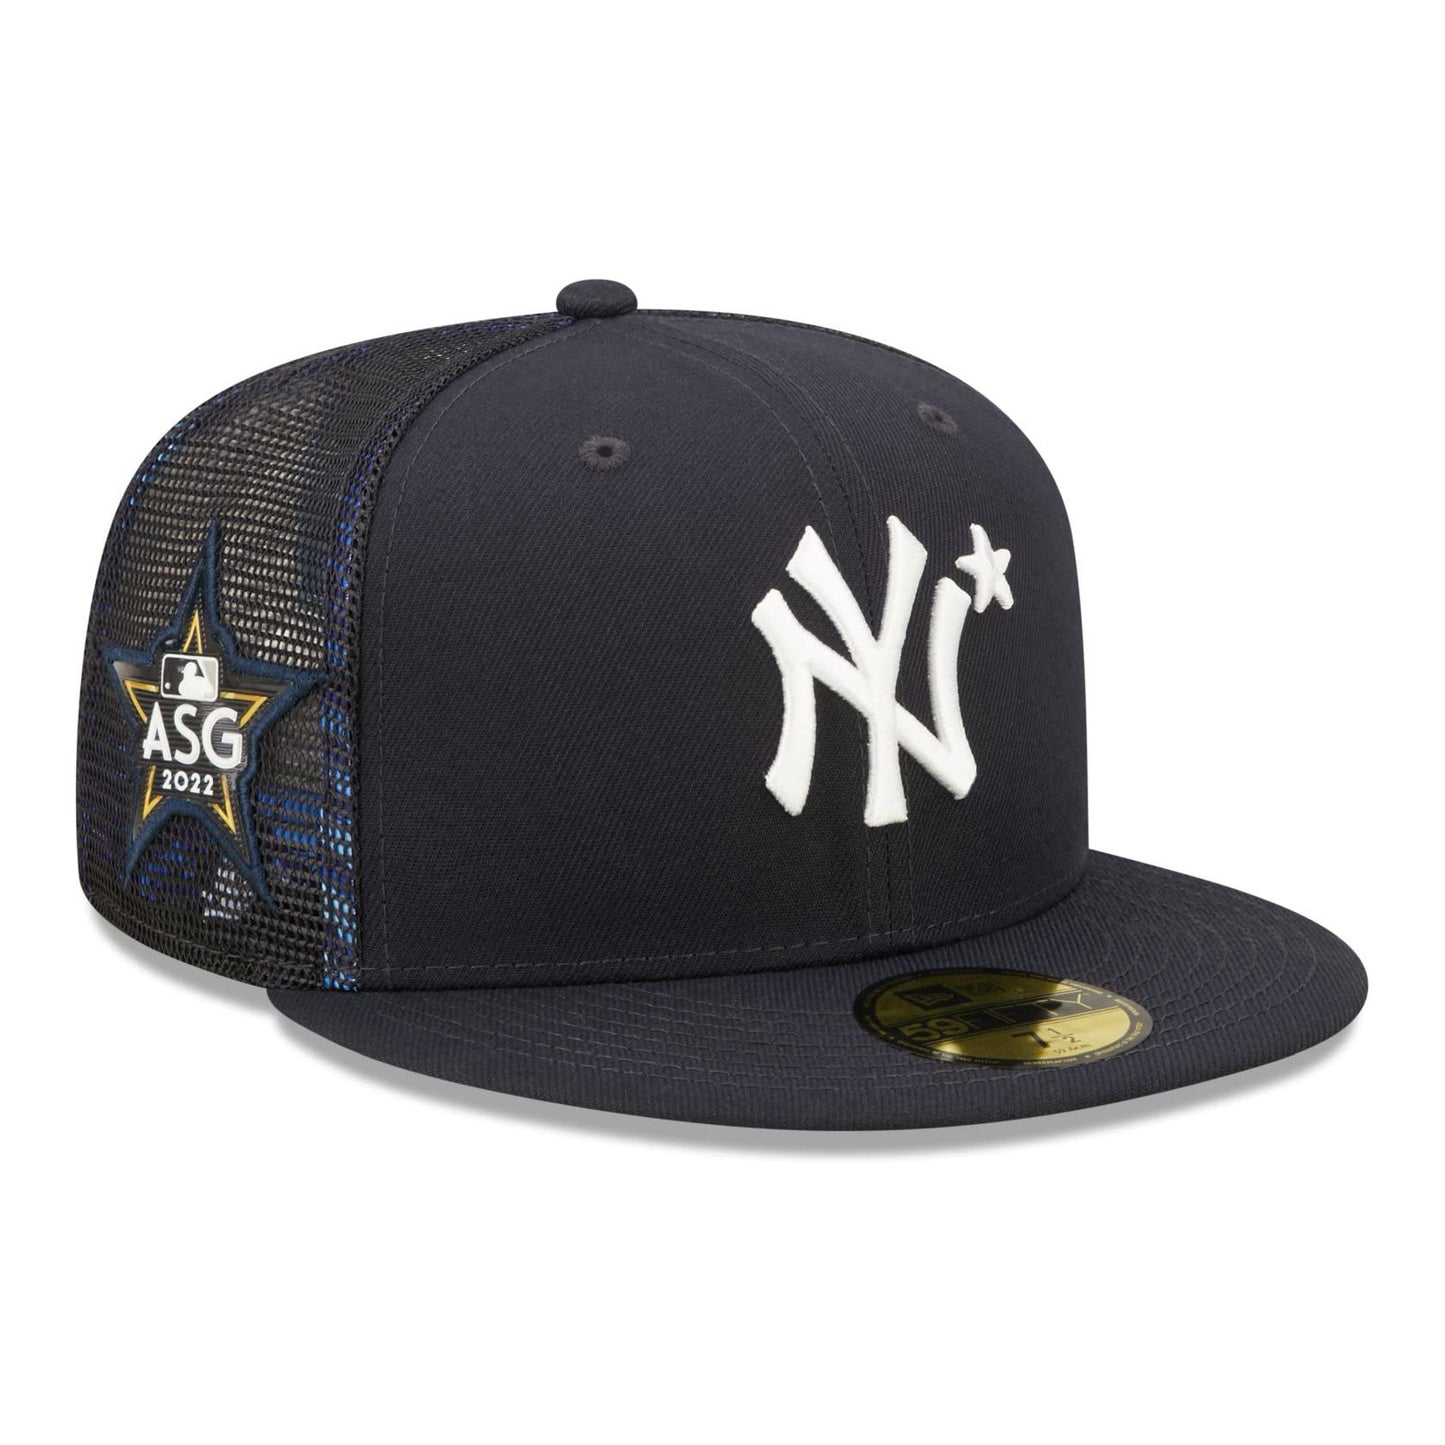 NEW ERA 59FIFTY MLB NEW YORK YANKEES ALL STAR GAME 2022 NAVY / TROPIC BLUE UV FITTED TRUCKER CAP